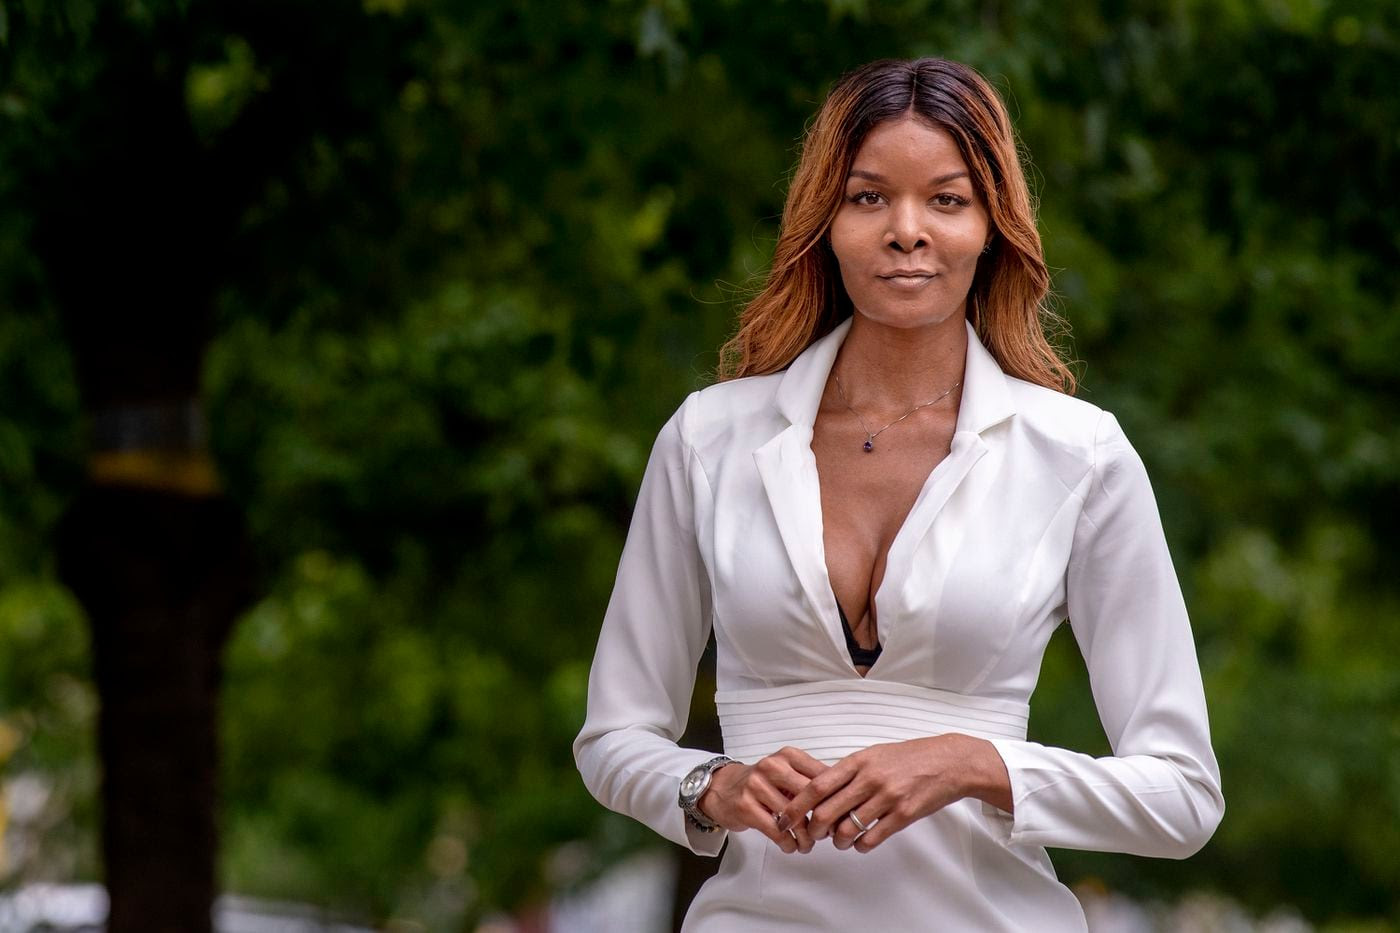 Sharron Cooks, the owner & CEO of Making Our Lives Easier, a consulting firm that advocates for marginalized communities poses in Cedar Park in West Philadelphia June 25, 2020.